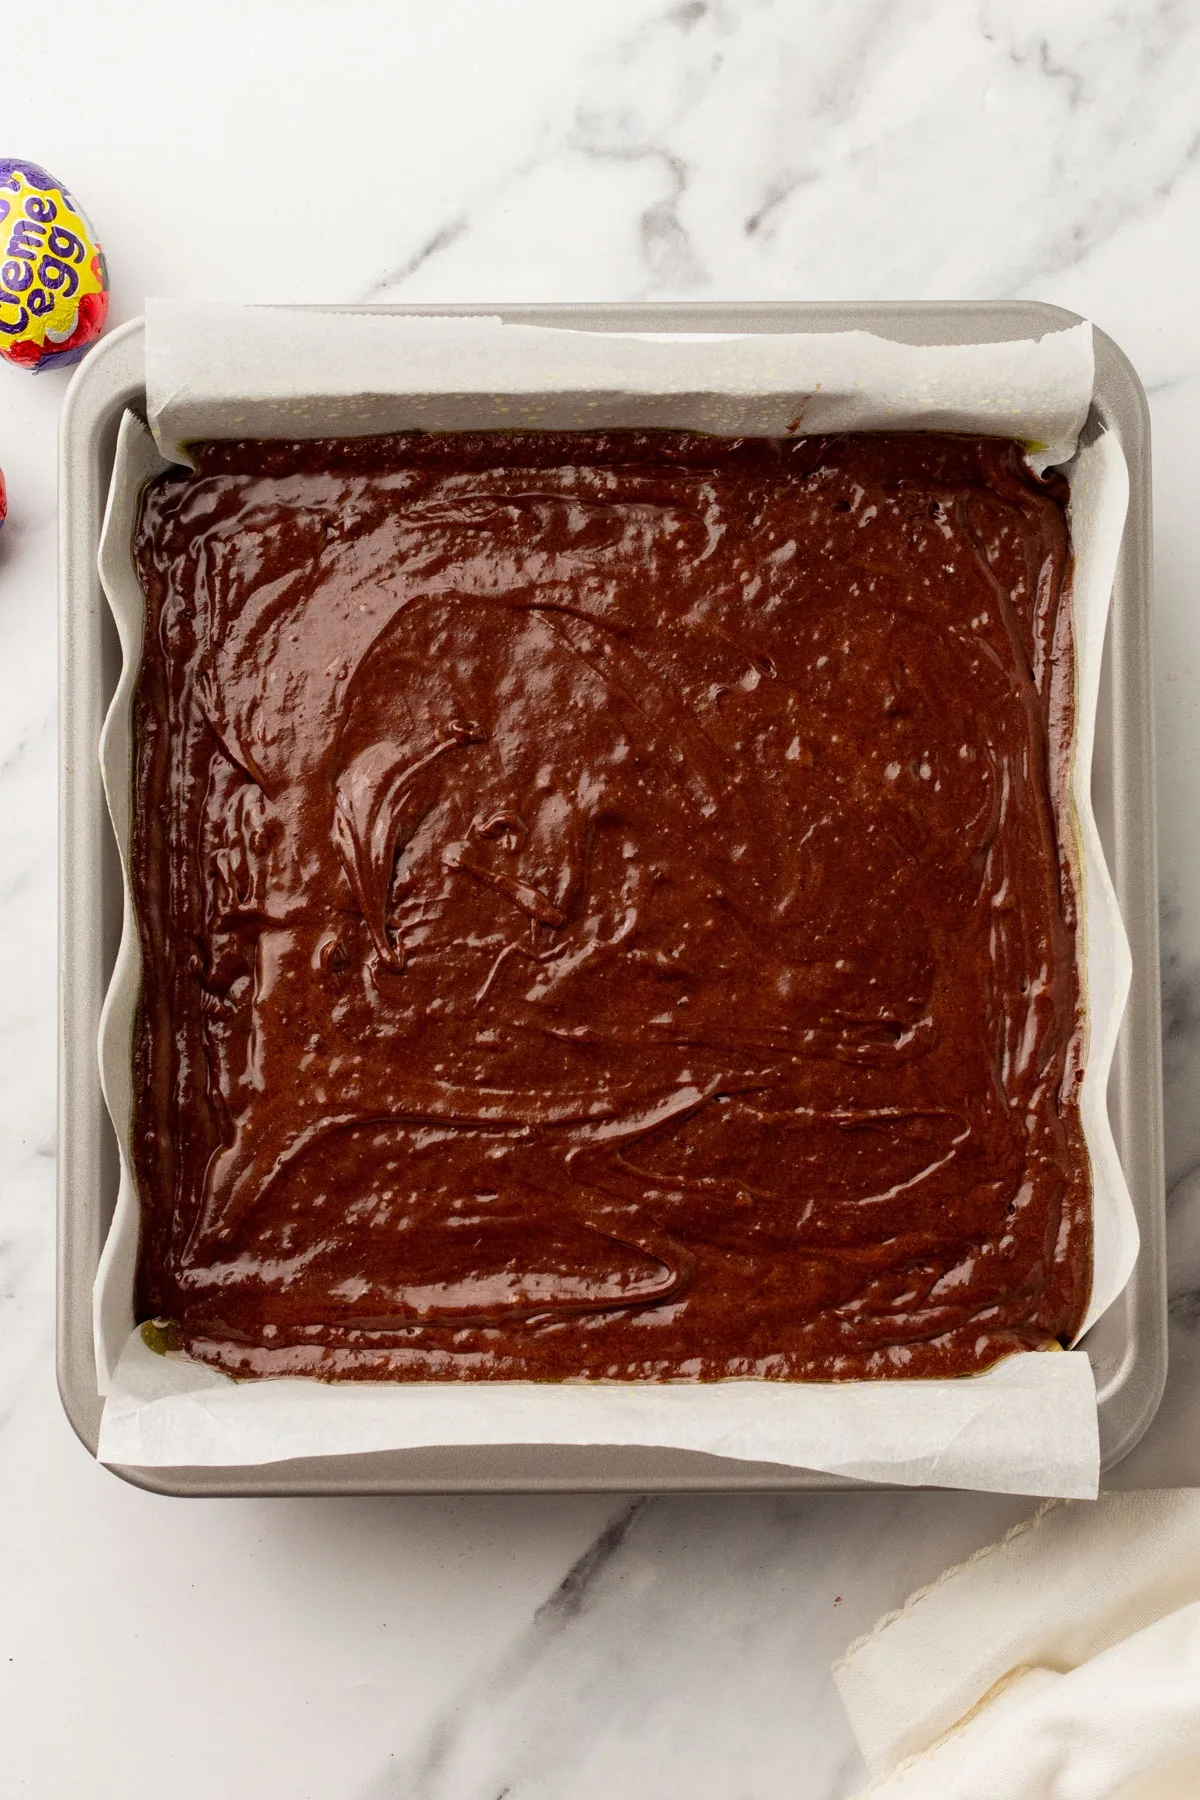 Brownie batter poured into the pan